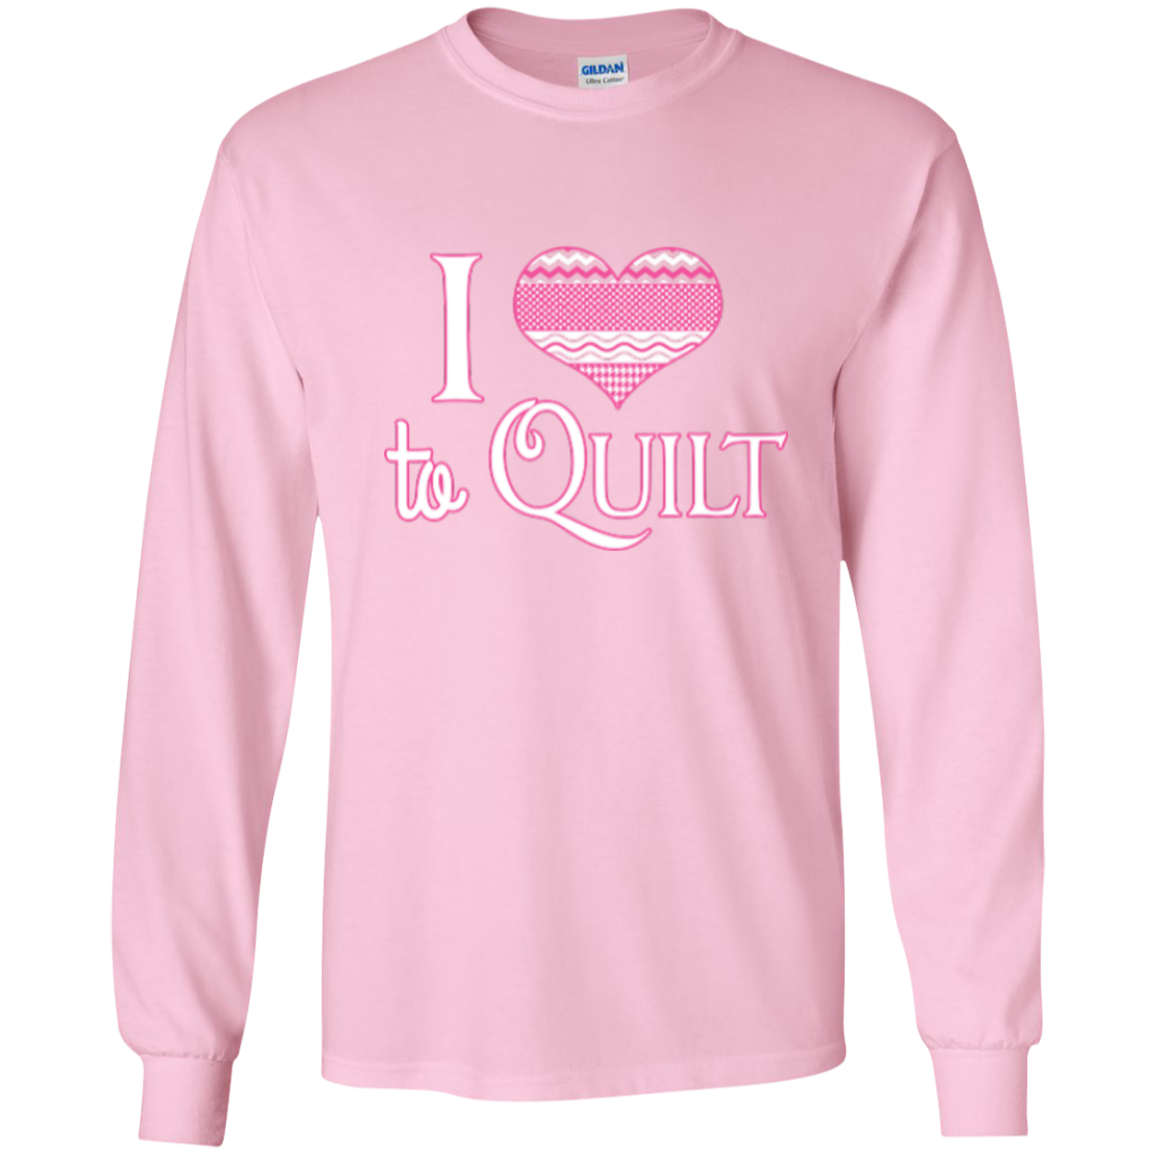 I Heart to Quilt Long Sleeve Ultra Cotton T-Shirt - Crafter4Life - 6